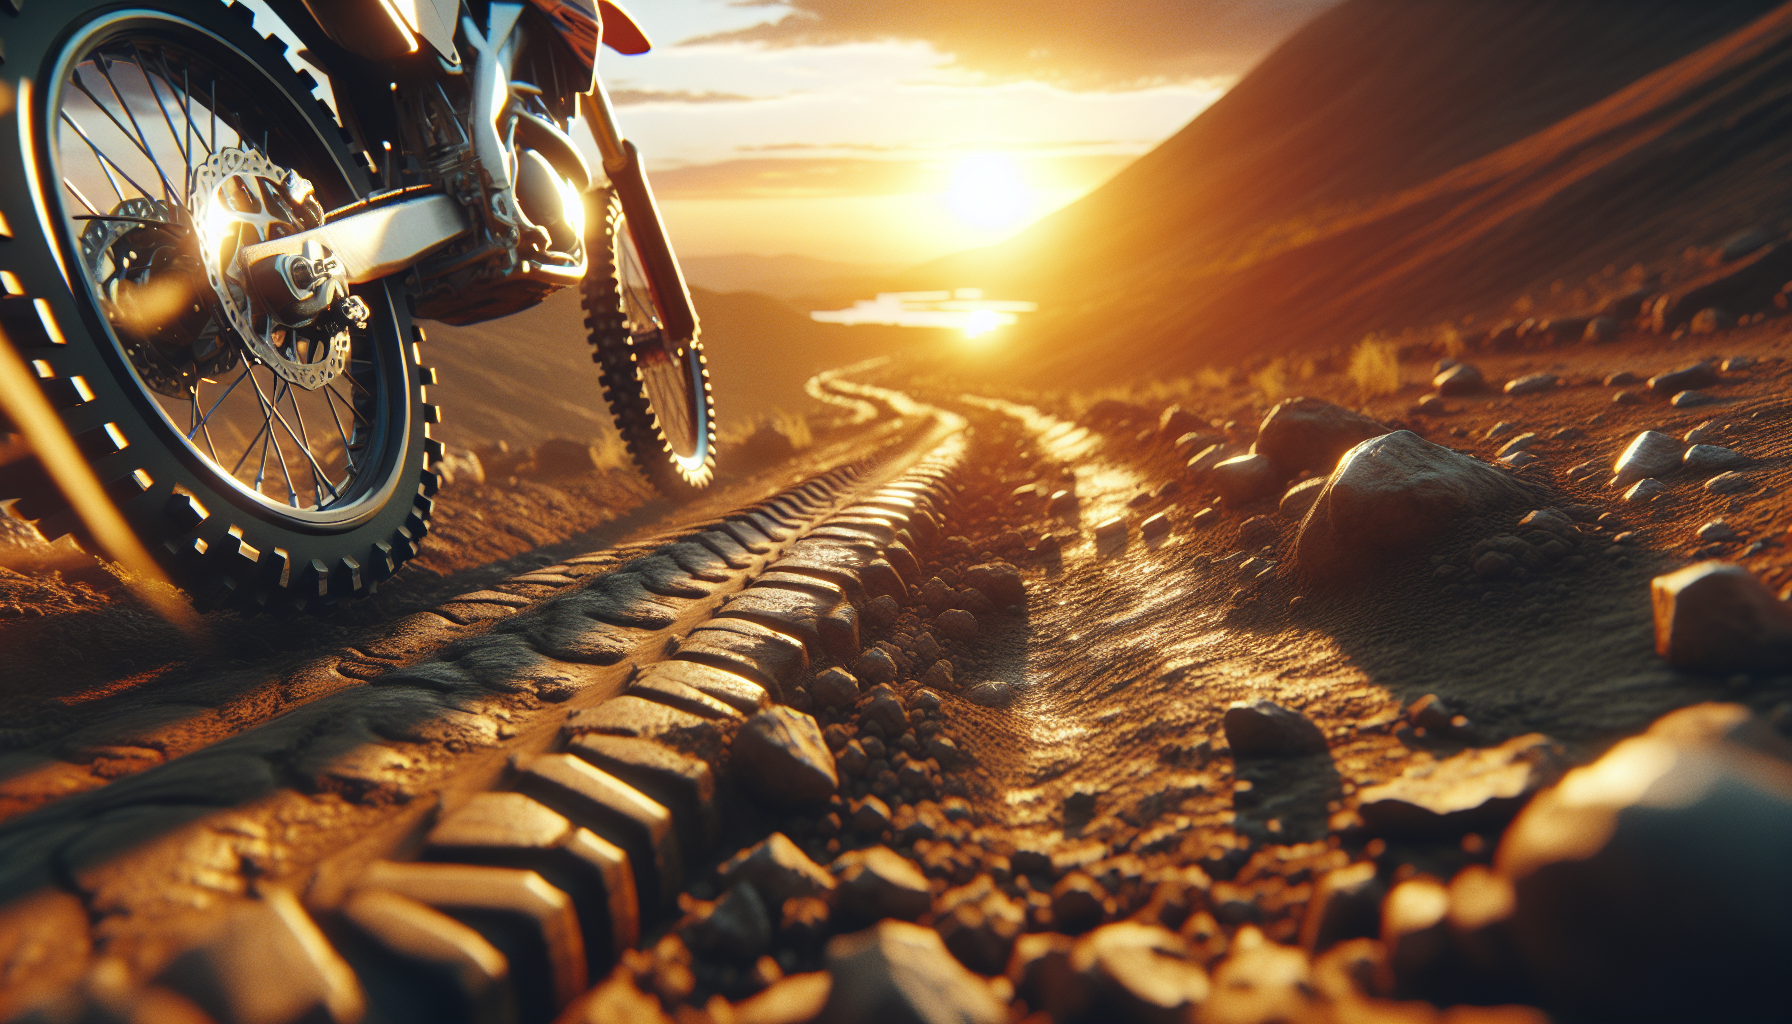 Maximize Your Bikes Performance with a Dirt Bike TuneUp